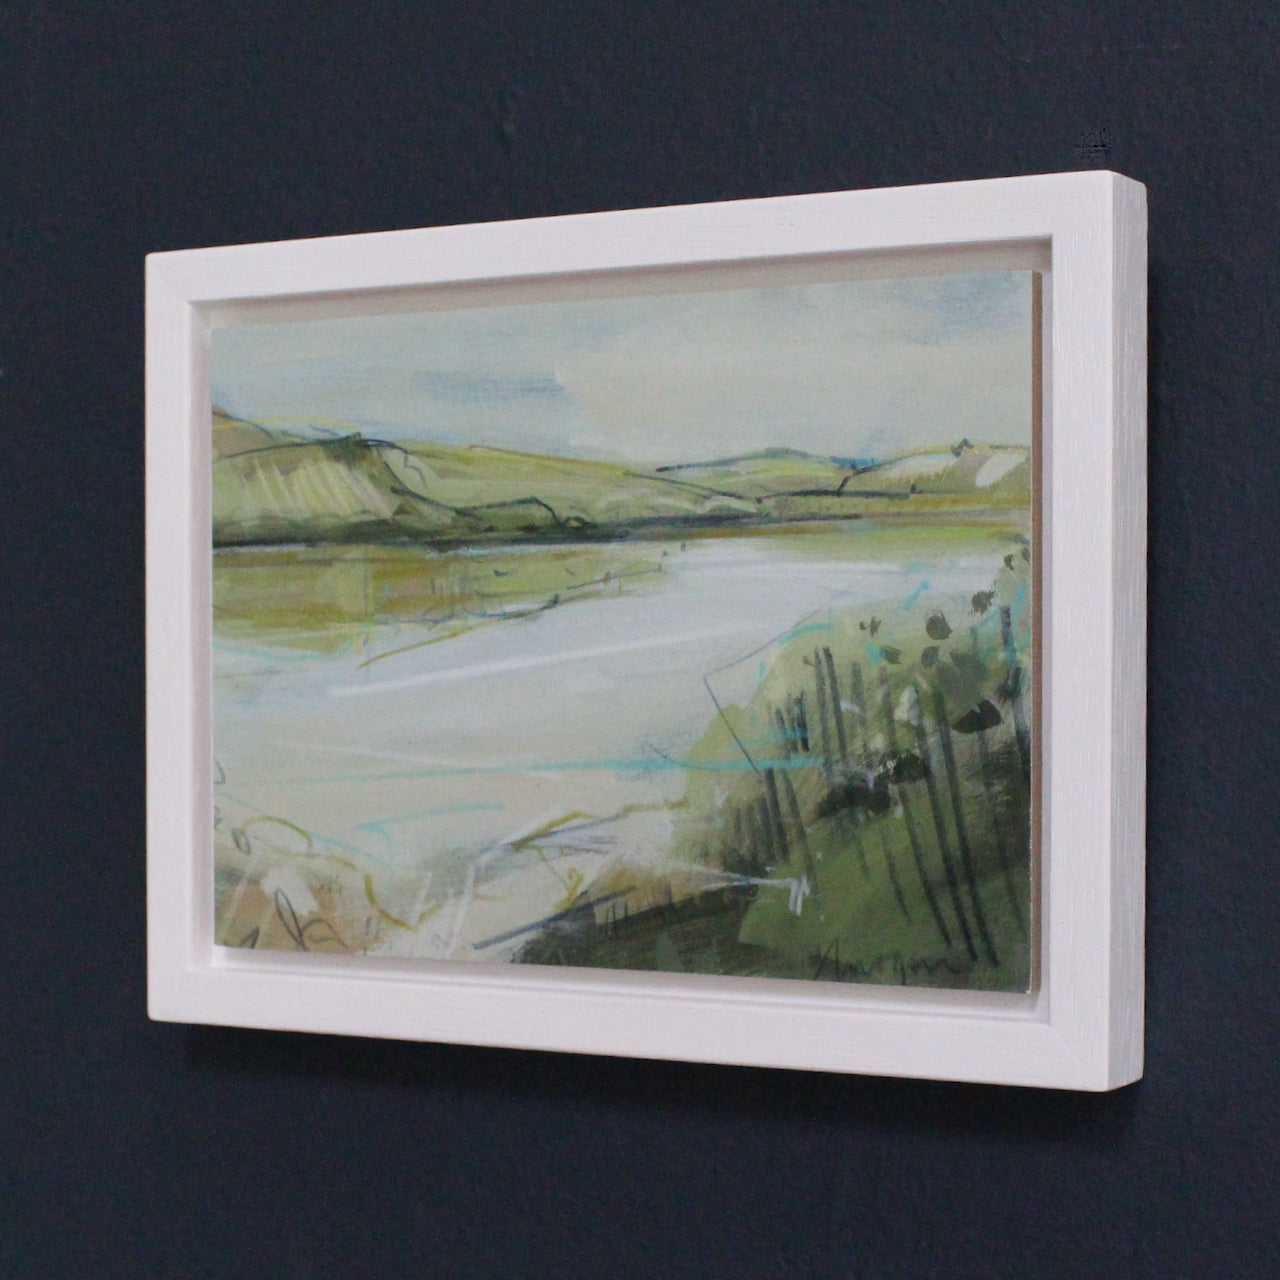 a small framed pale landscape with green hills, pale blue river by Imogen Bone, Cornish artist 